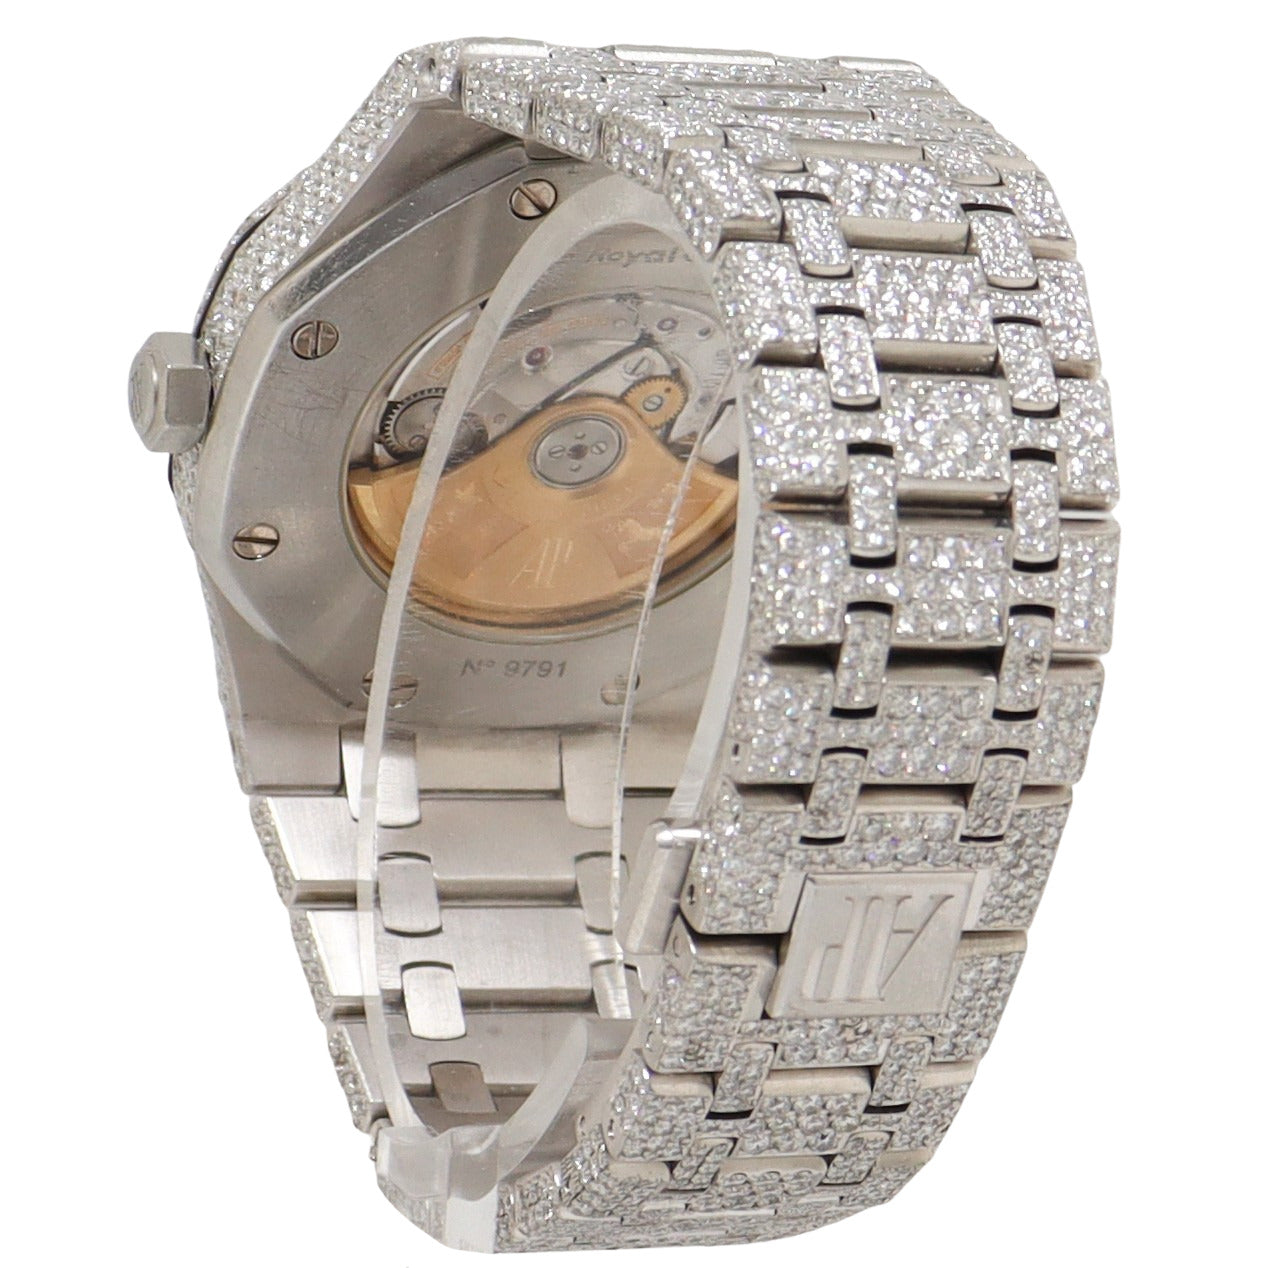 Audemars Piguet Royal Oak 41mm ICED OUT Stainless Steel Pave Diamond Dial Watch - Happy Jewelers Fine Jewelry Lifetime Warranty